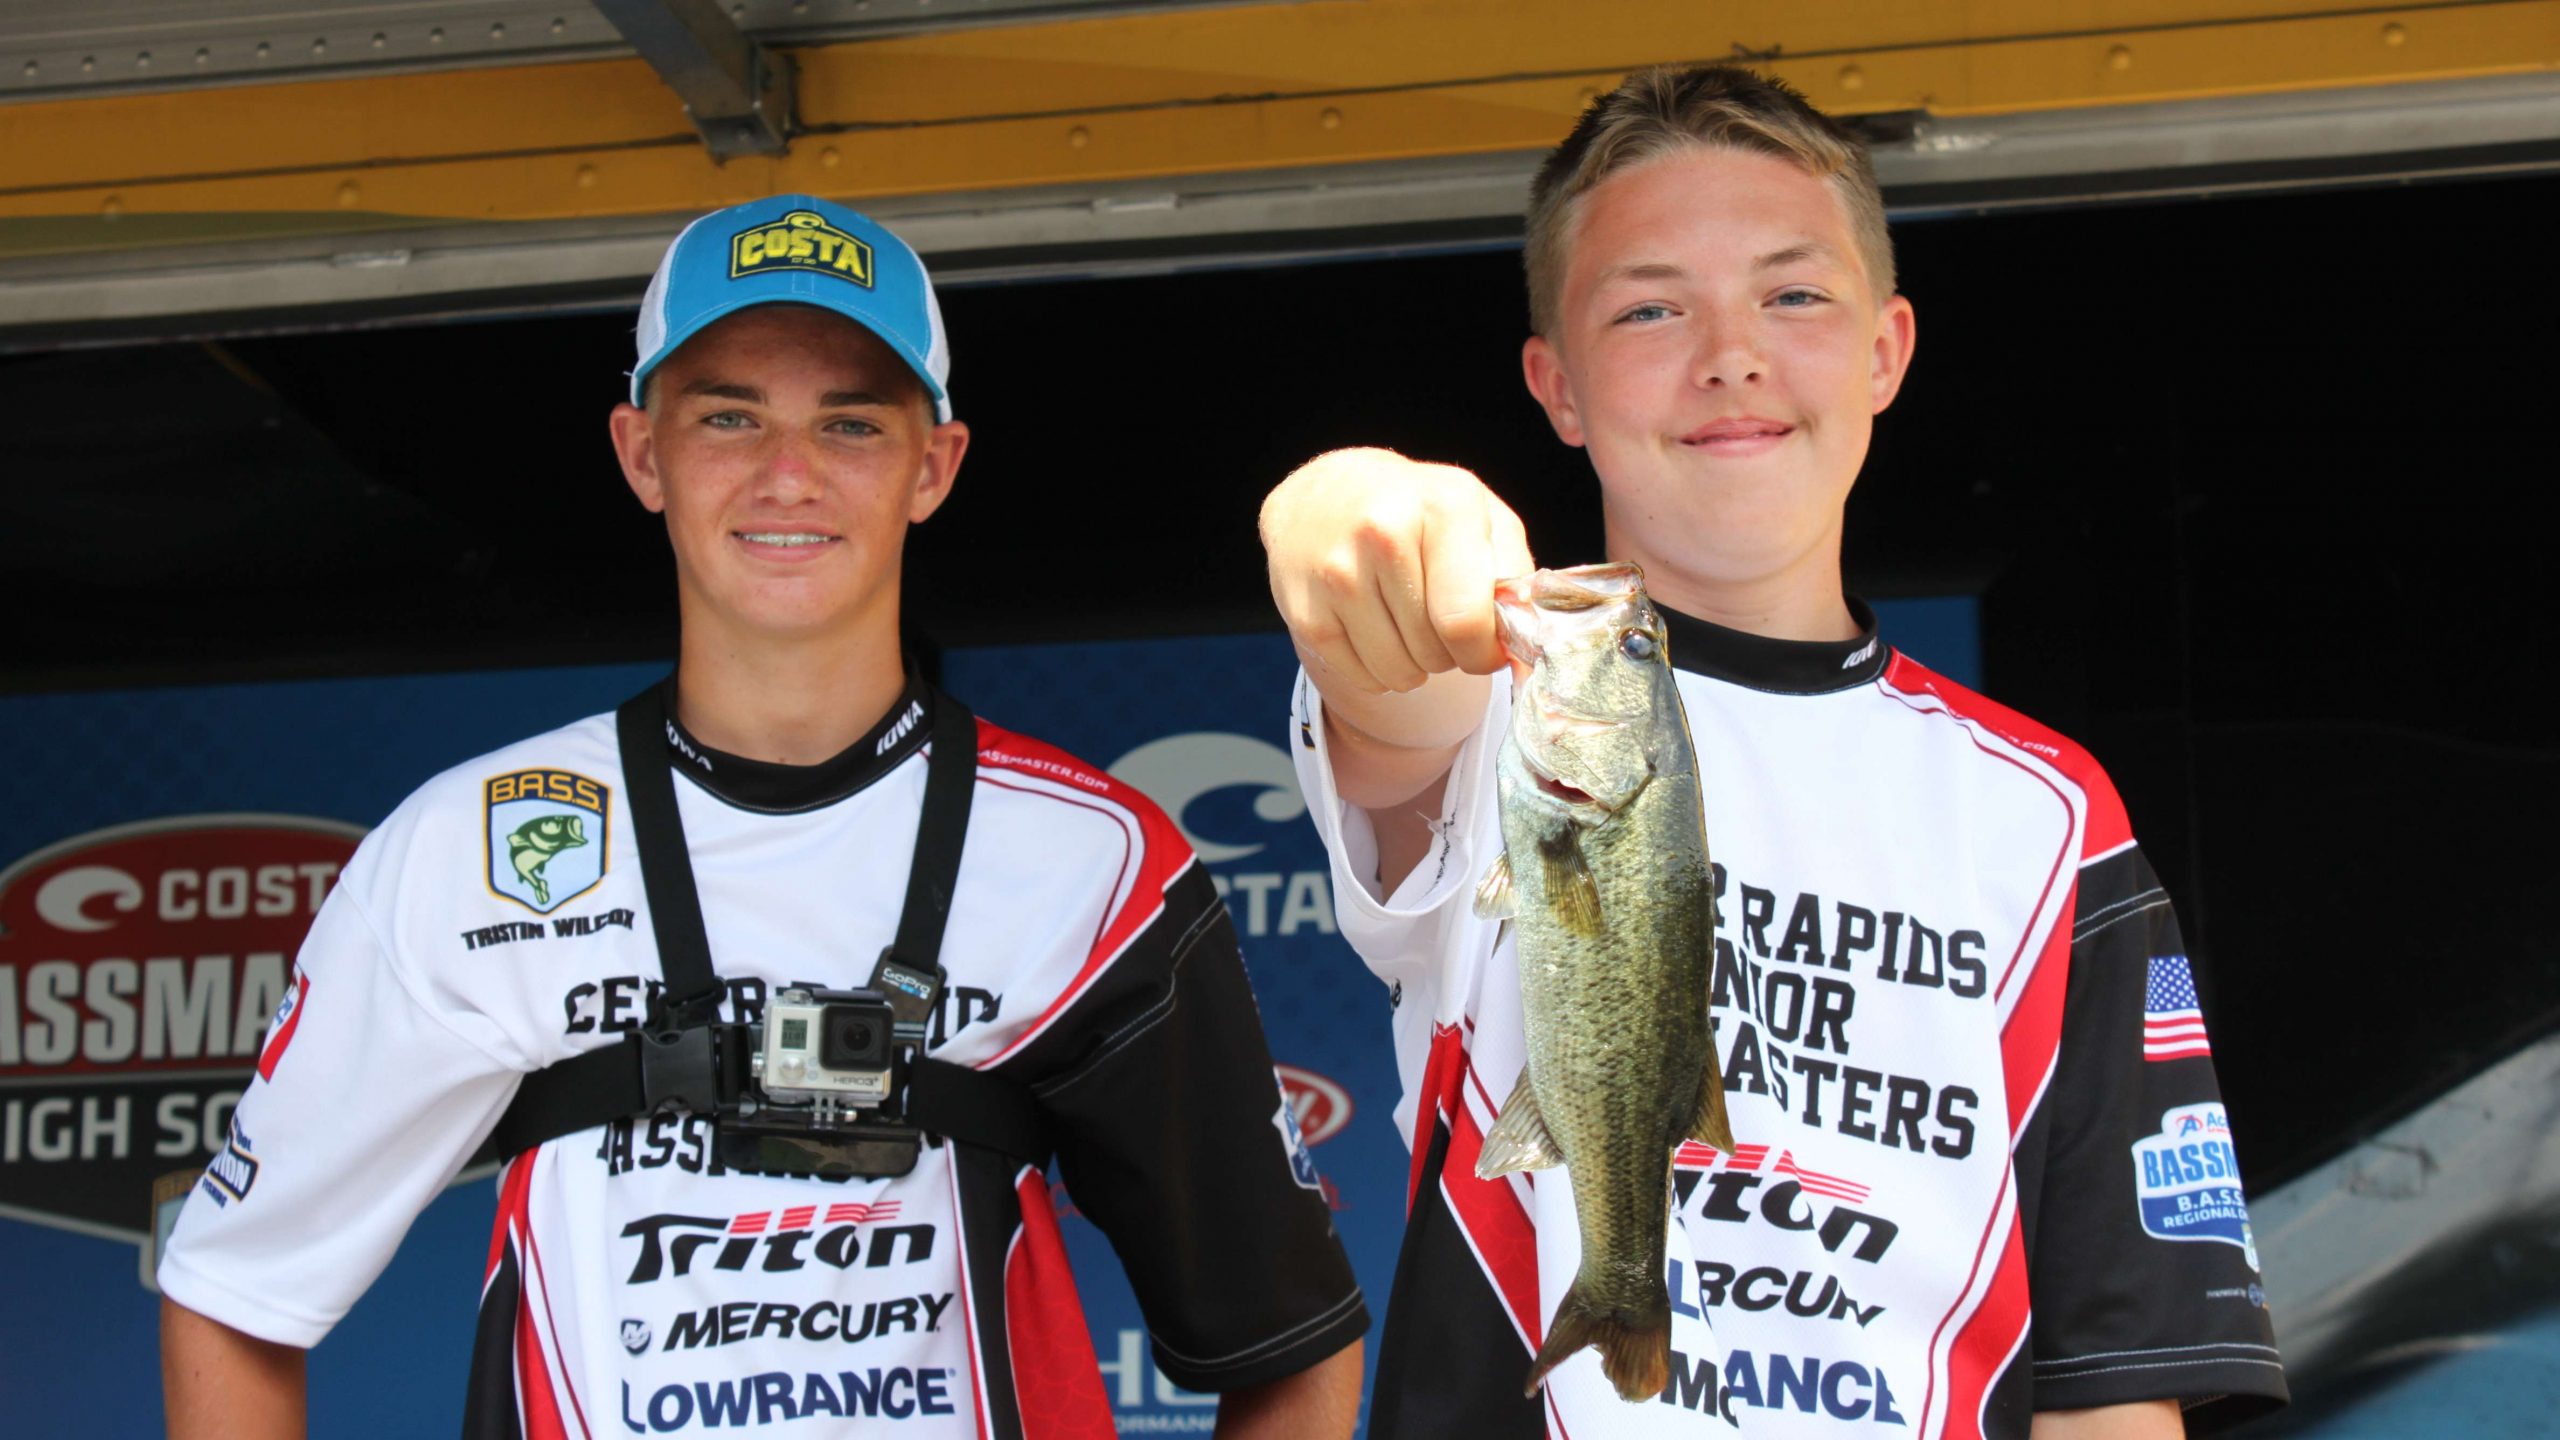 Tristin Wilcox and Bentley Fletcher of Team Iowa finished 28th with a 1-7 total over two days.